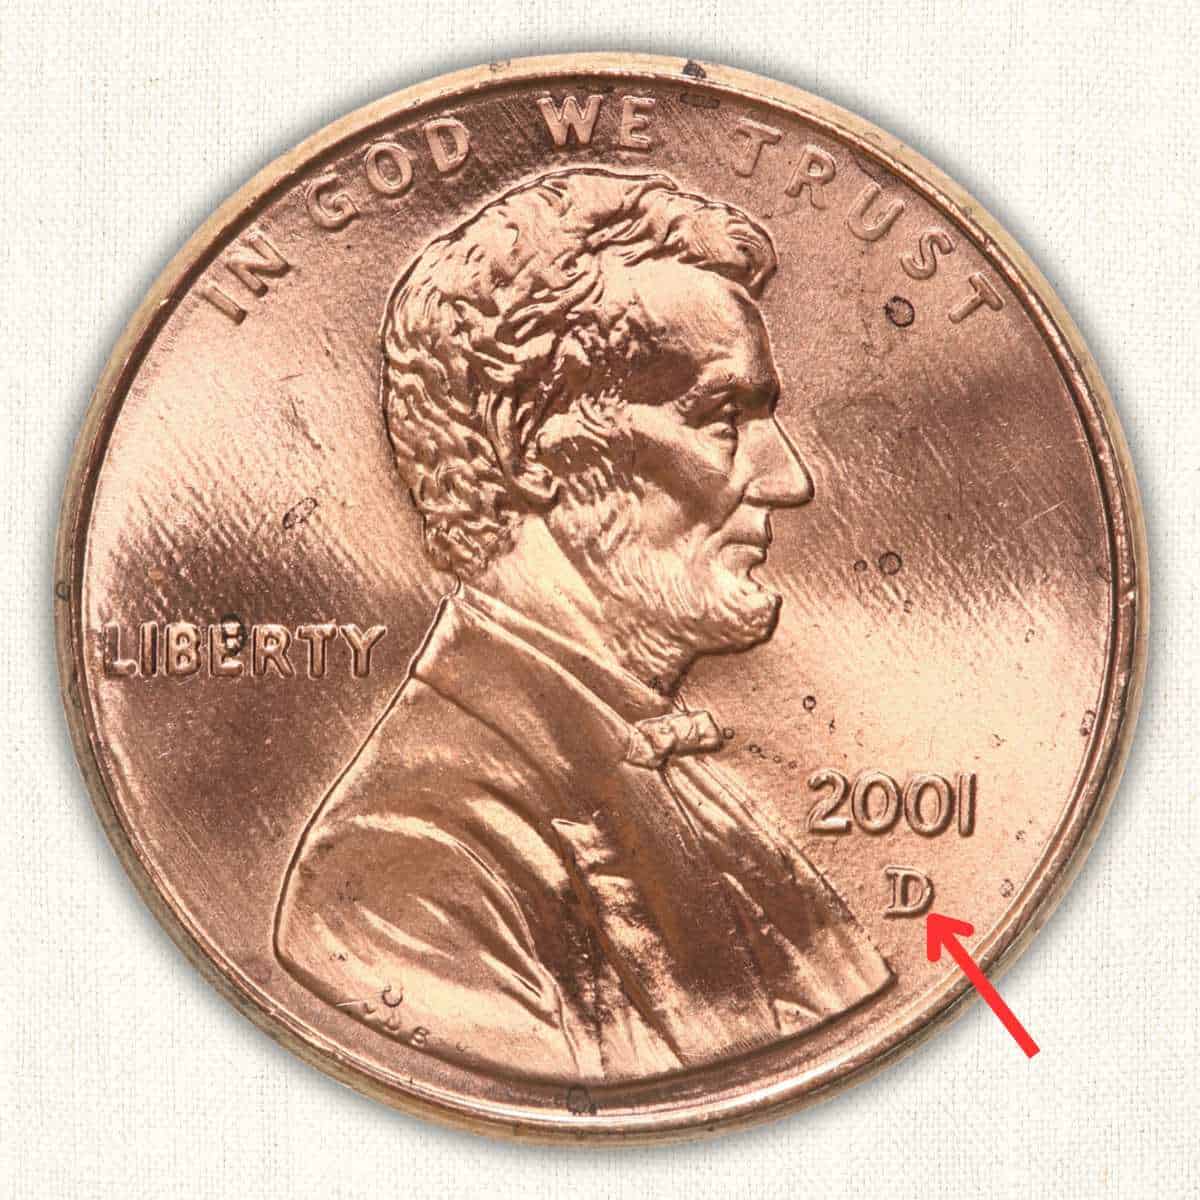 2001 D Penny Worth